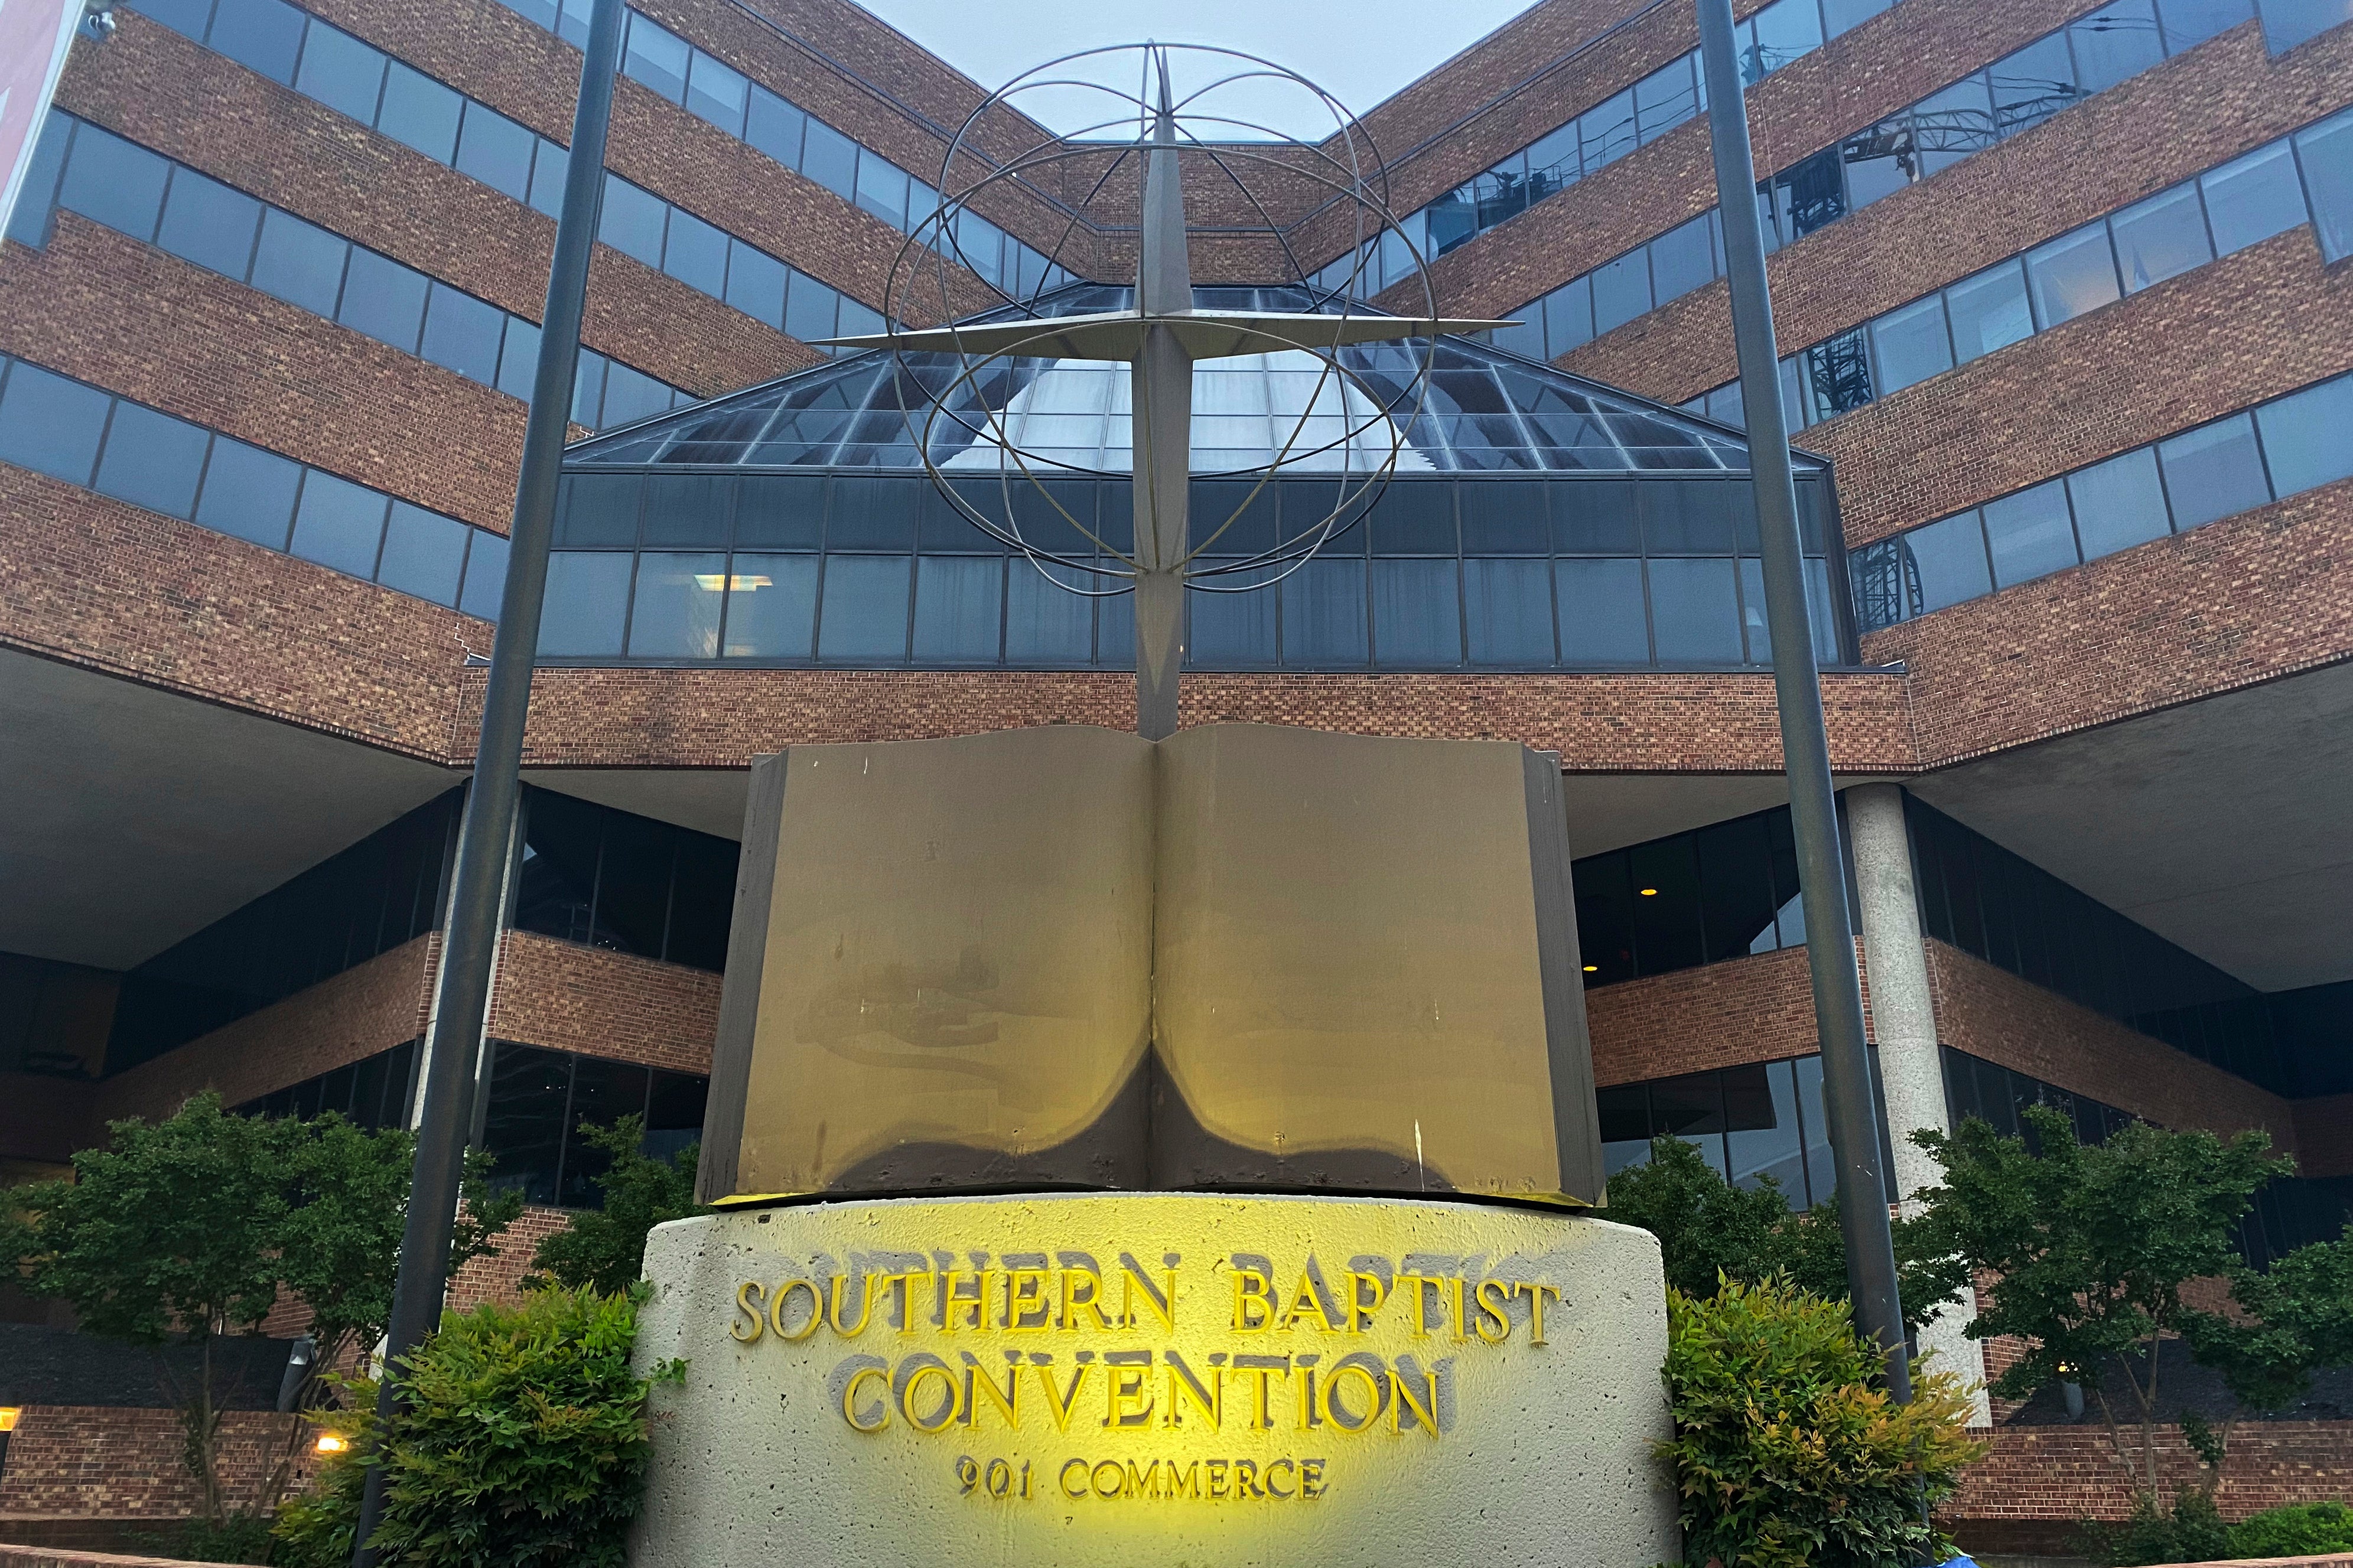 Top administrative leaders for the SBC, the largest Protestant denomination in America, said that they will release a secret list of hundreds of pastors and other church-affiliated personnel accused of sexual abuse